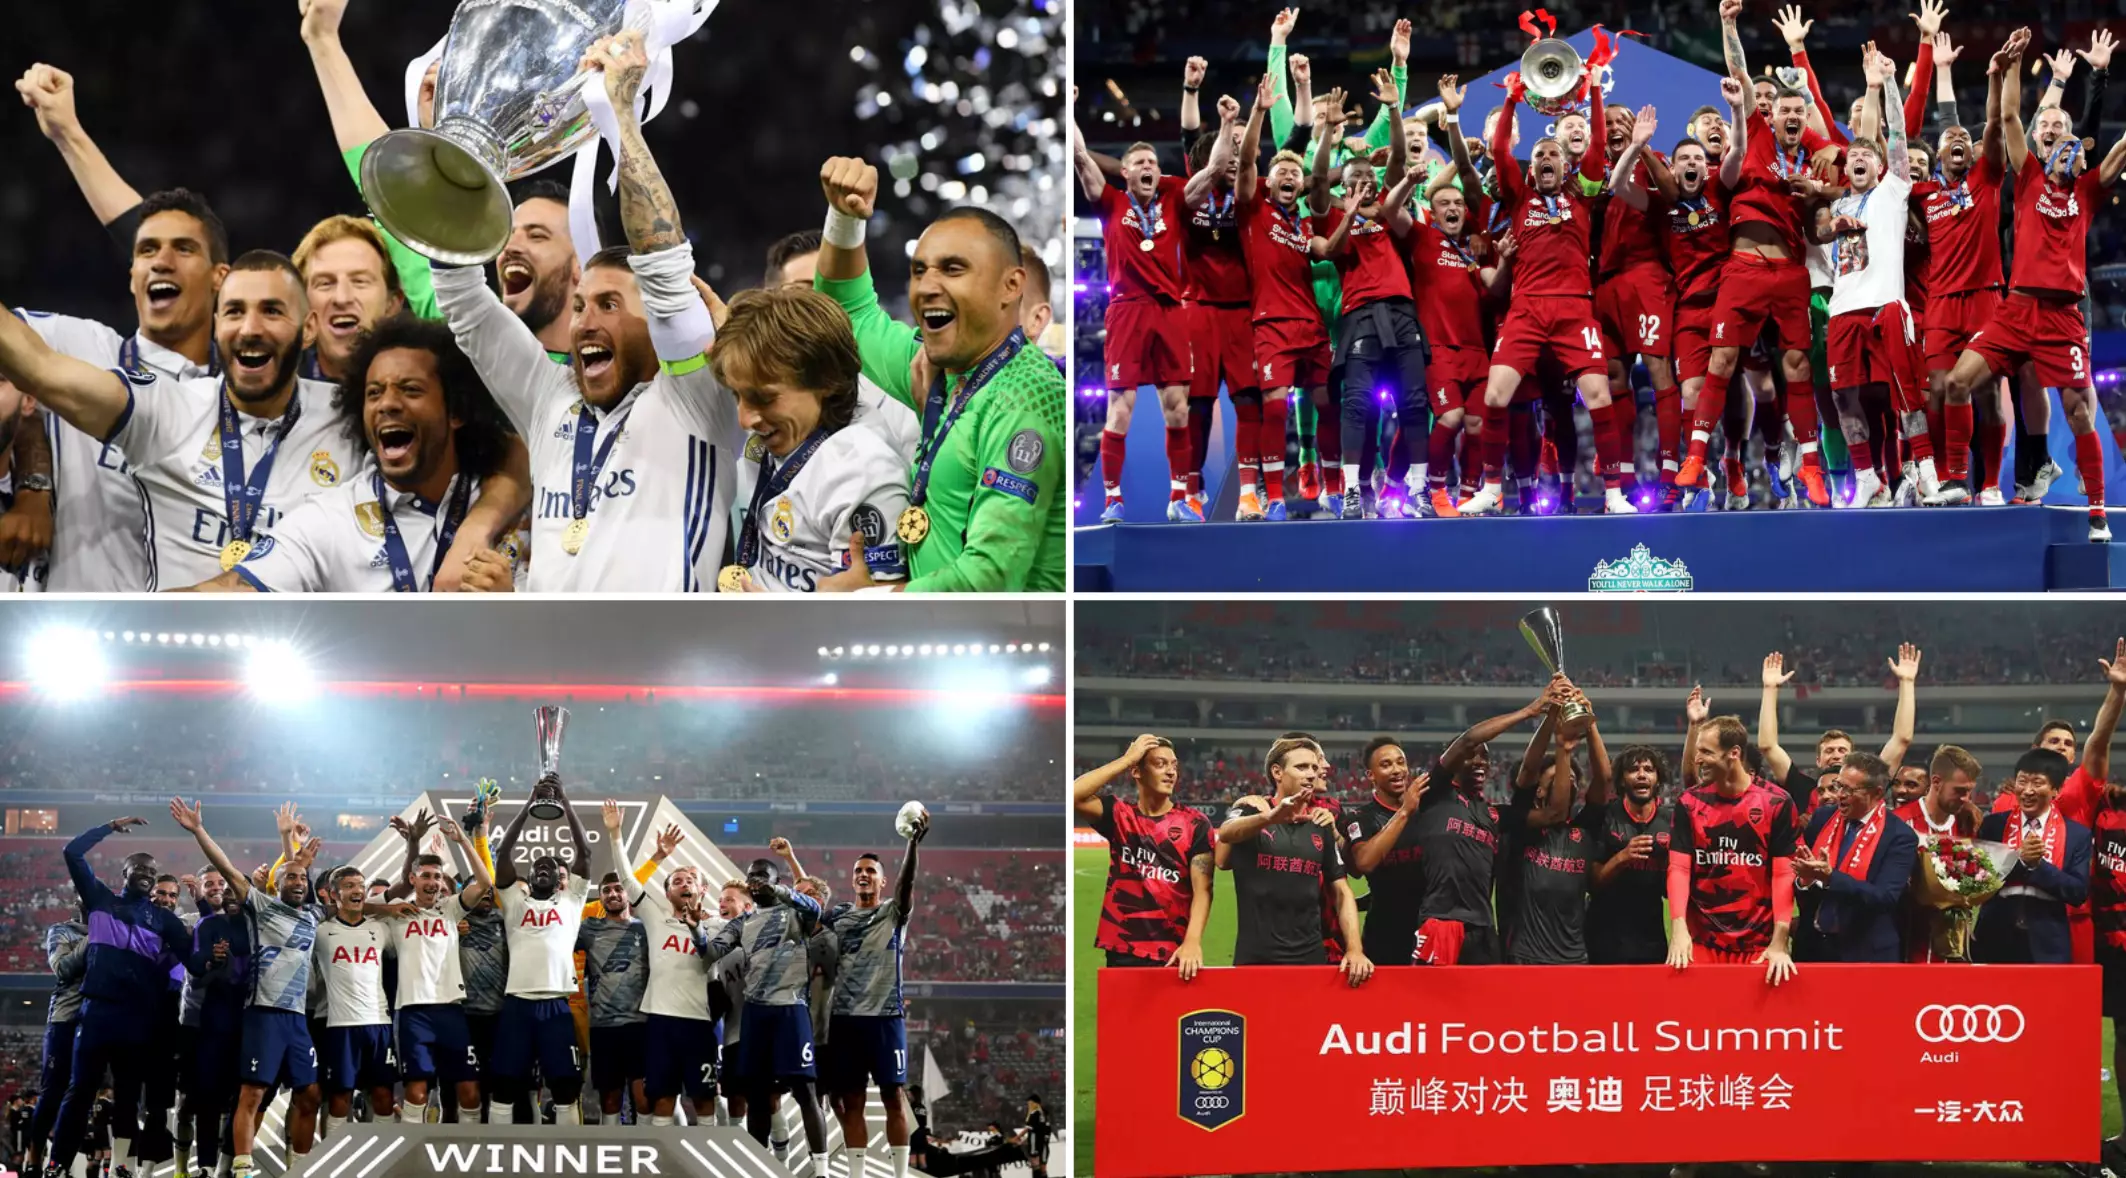 Real Madrid’s 13 Champions League Wins Will Transfer To European Super League Titles